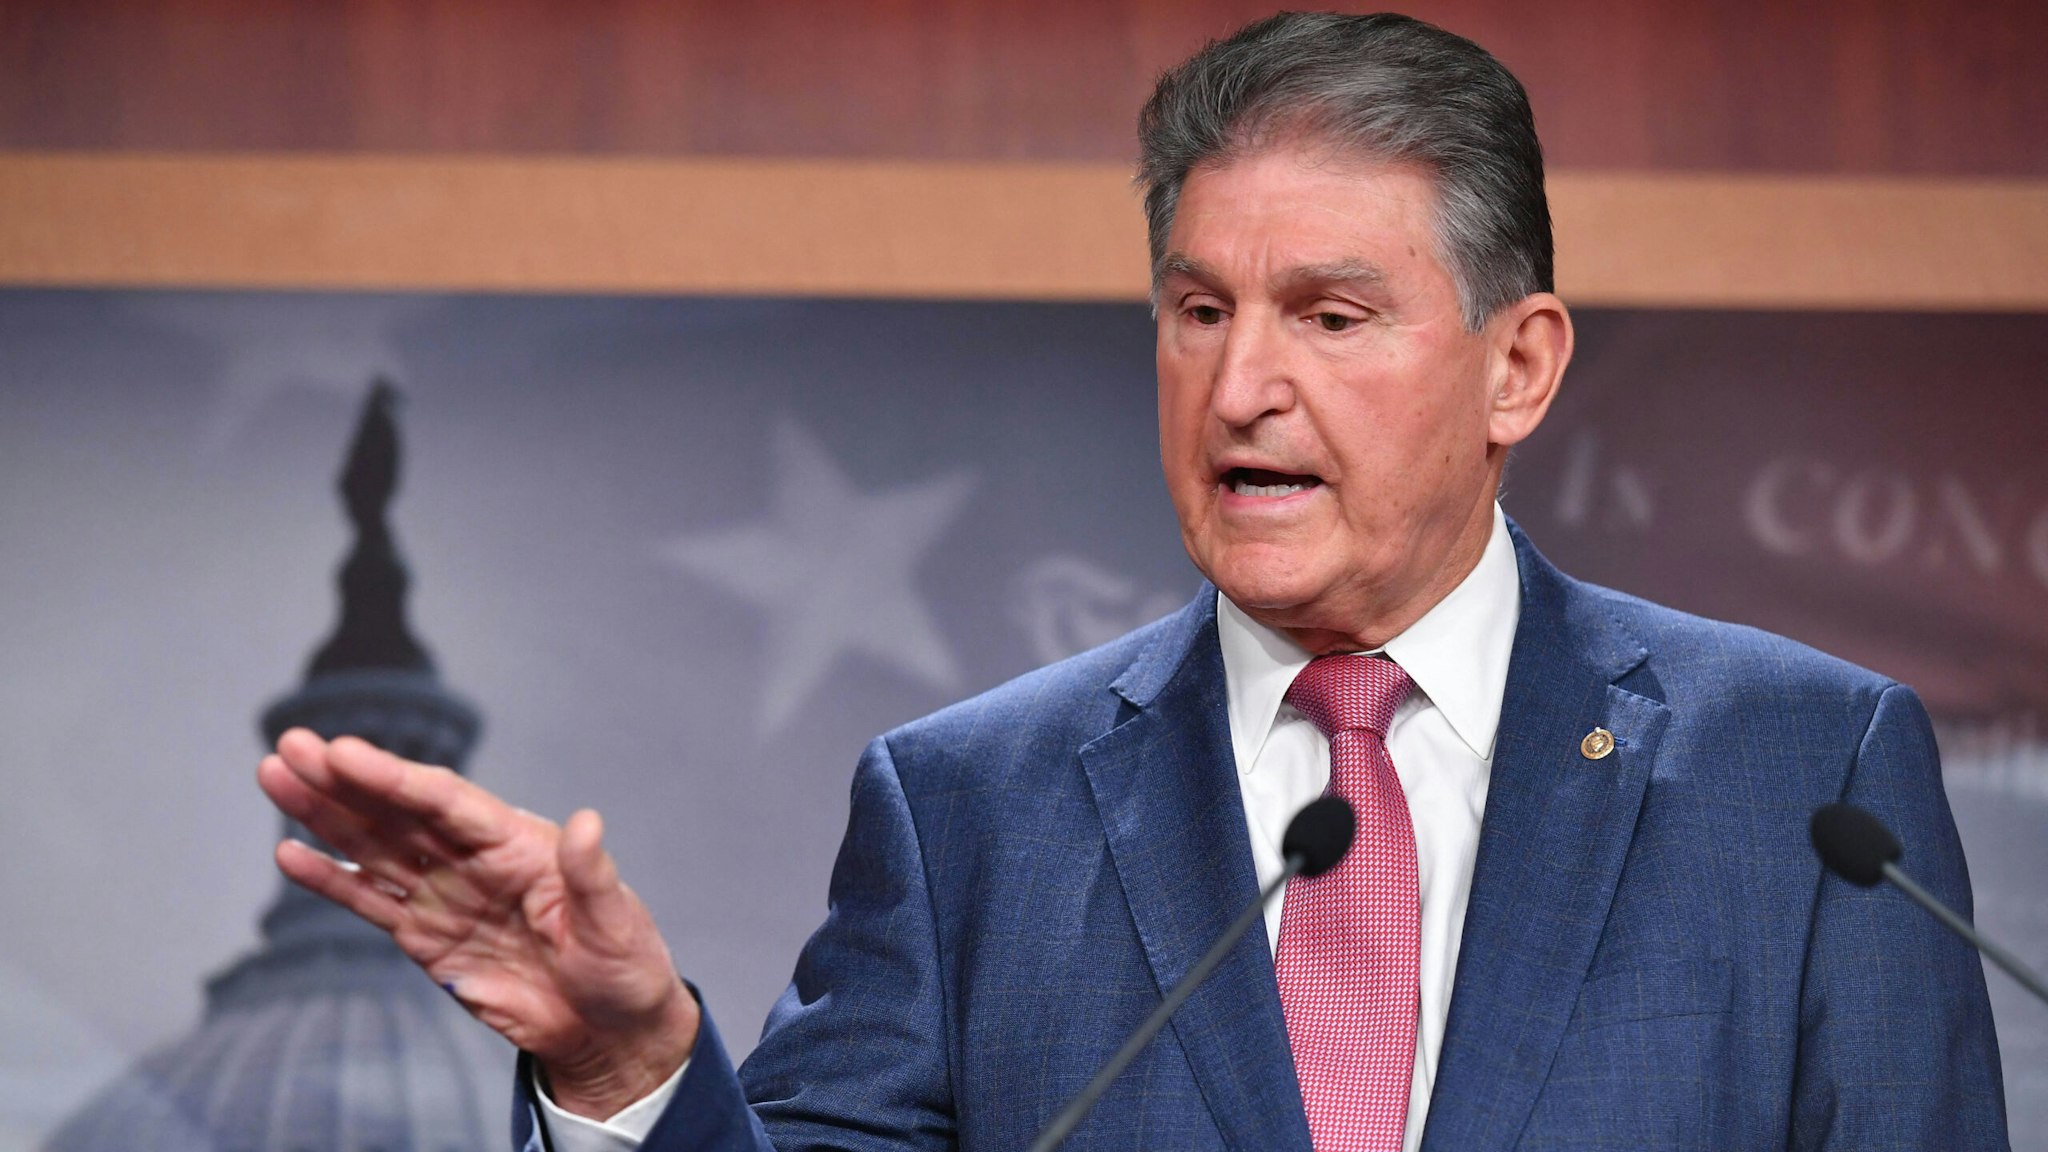 US Senator Joe Manchin, D-WV, speaks during a press conference as he talks about his position on US President Joe Bidens sweeping economic agenda on Capitol Hill in Washington, DC, on November 1, 2021.